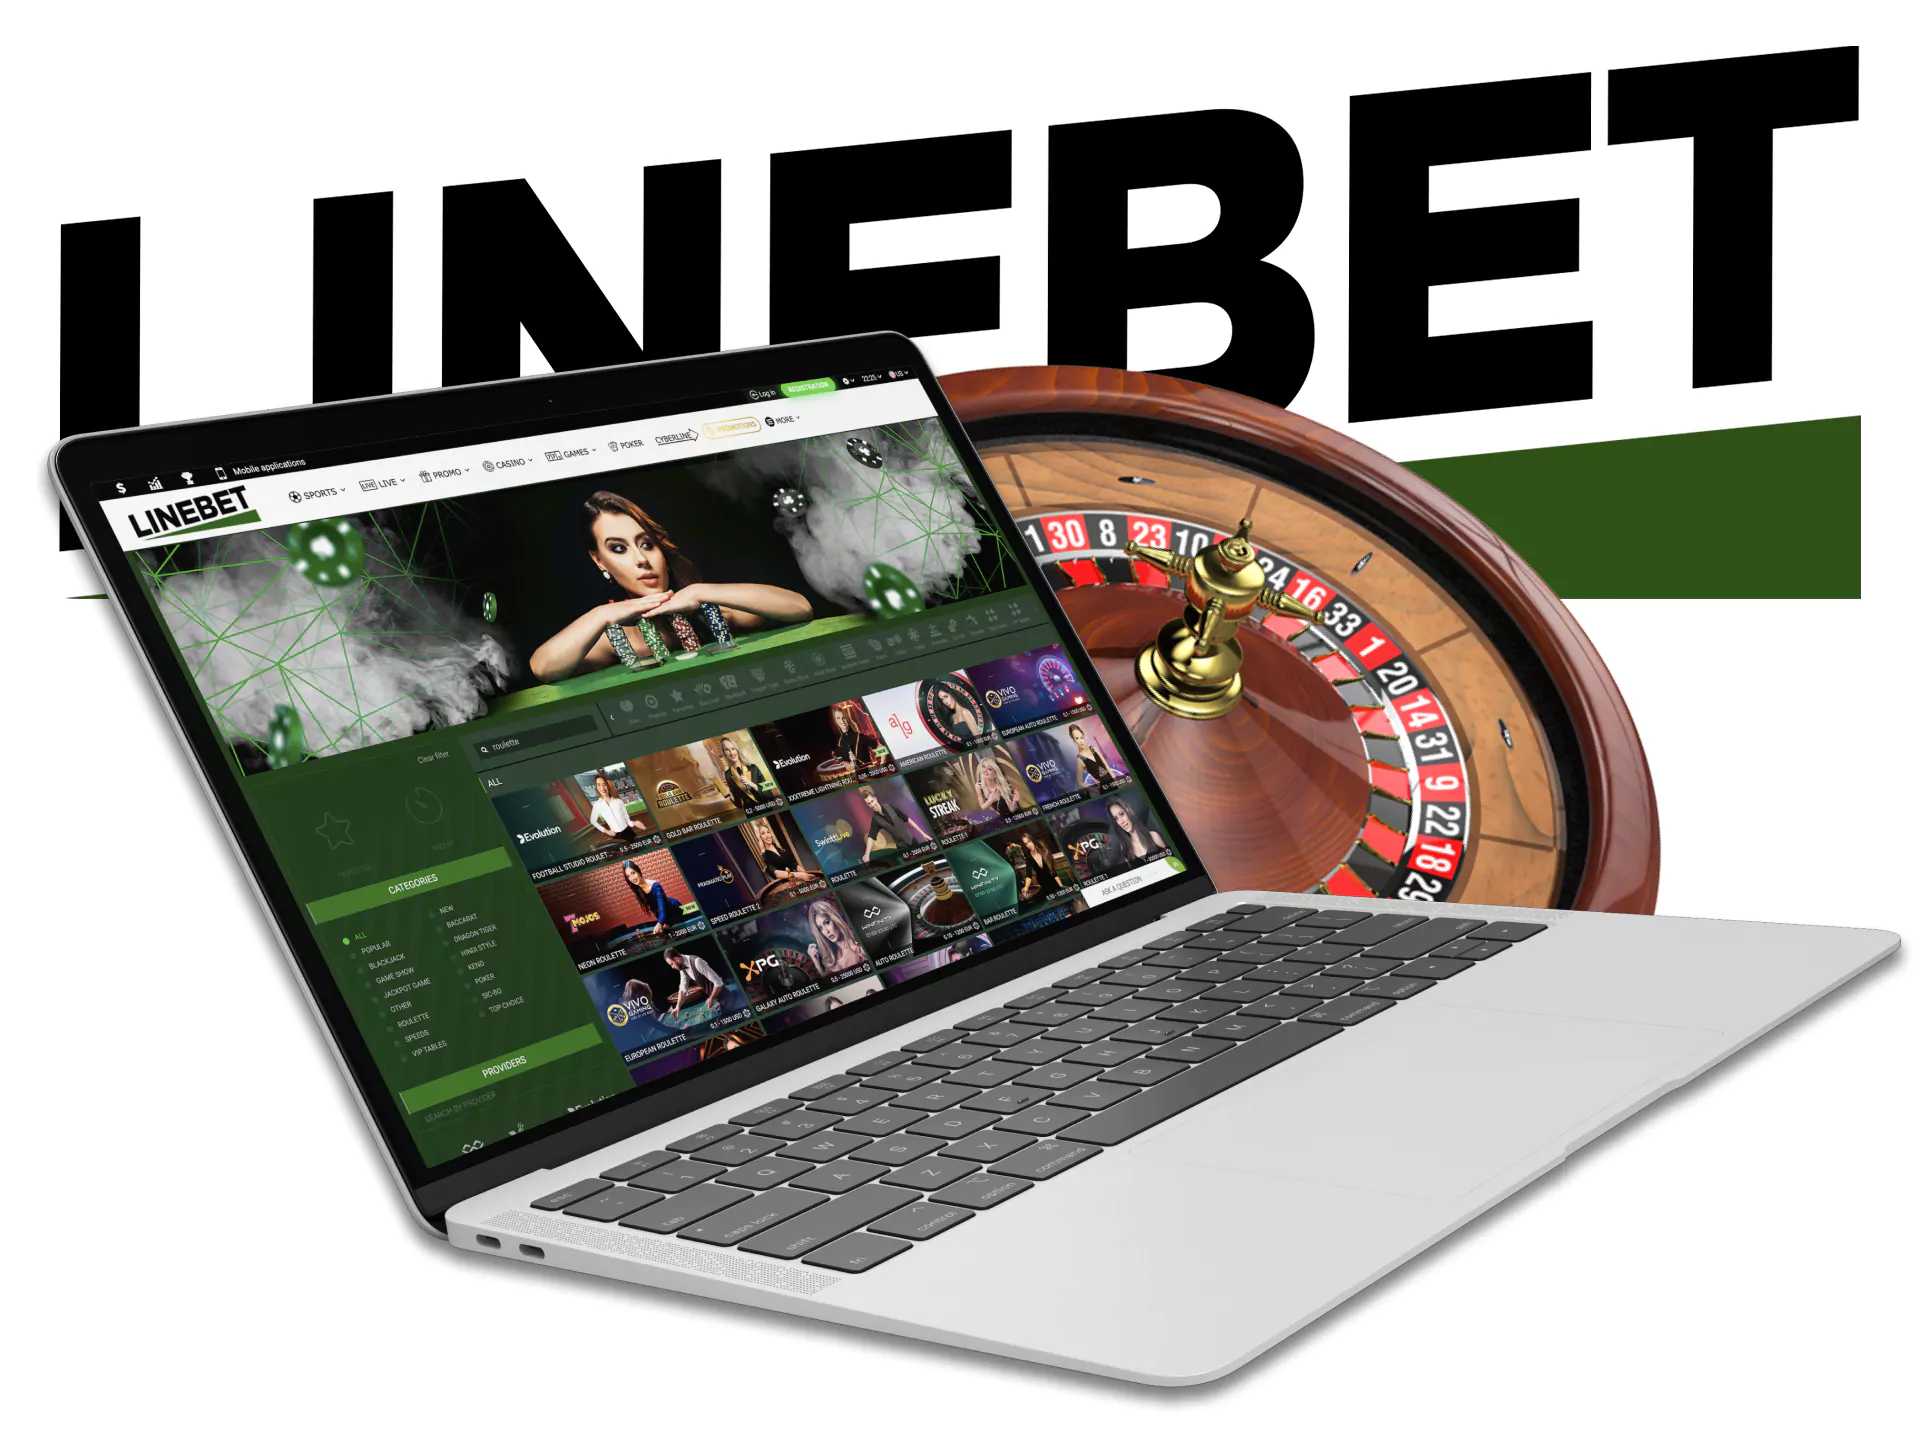 Try your luck playing roulette on Linebet.